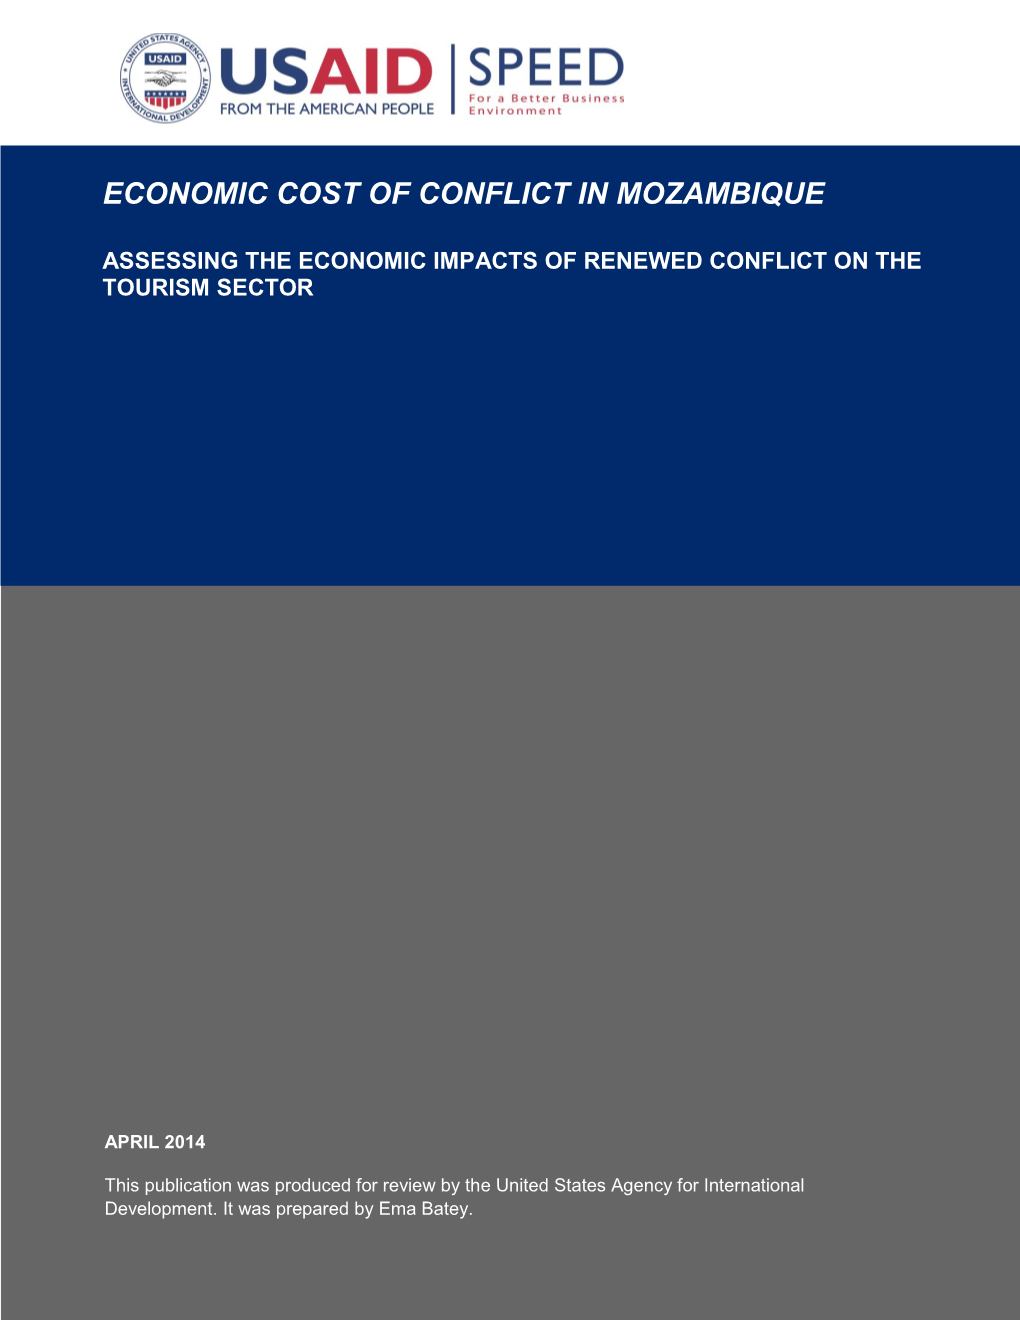 Economic Cost of Conflict in Mozambique